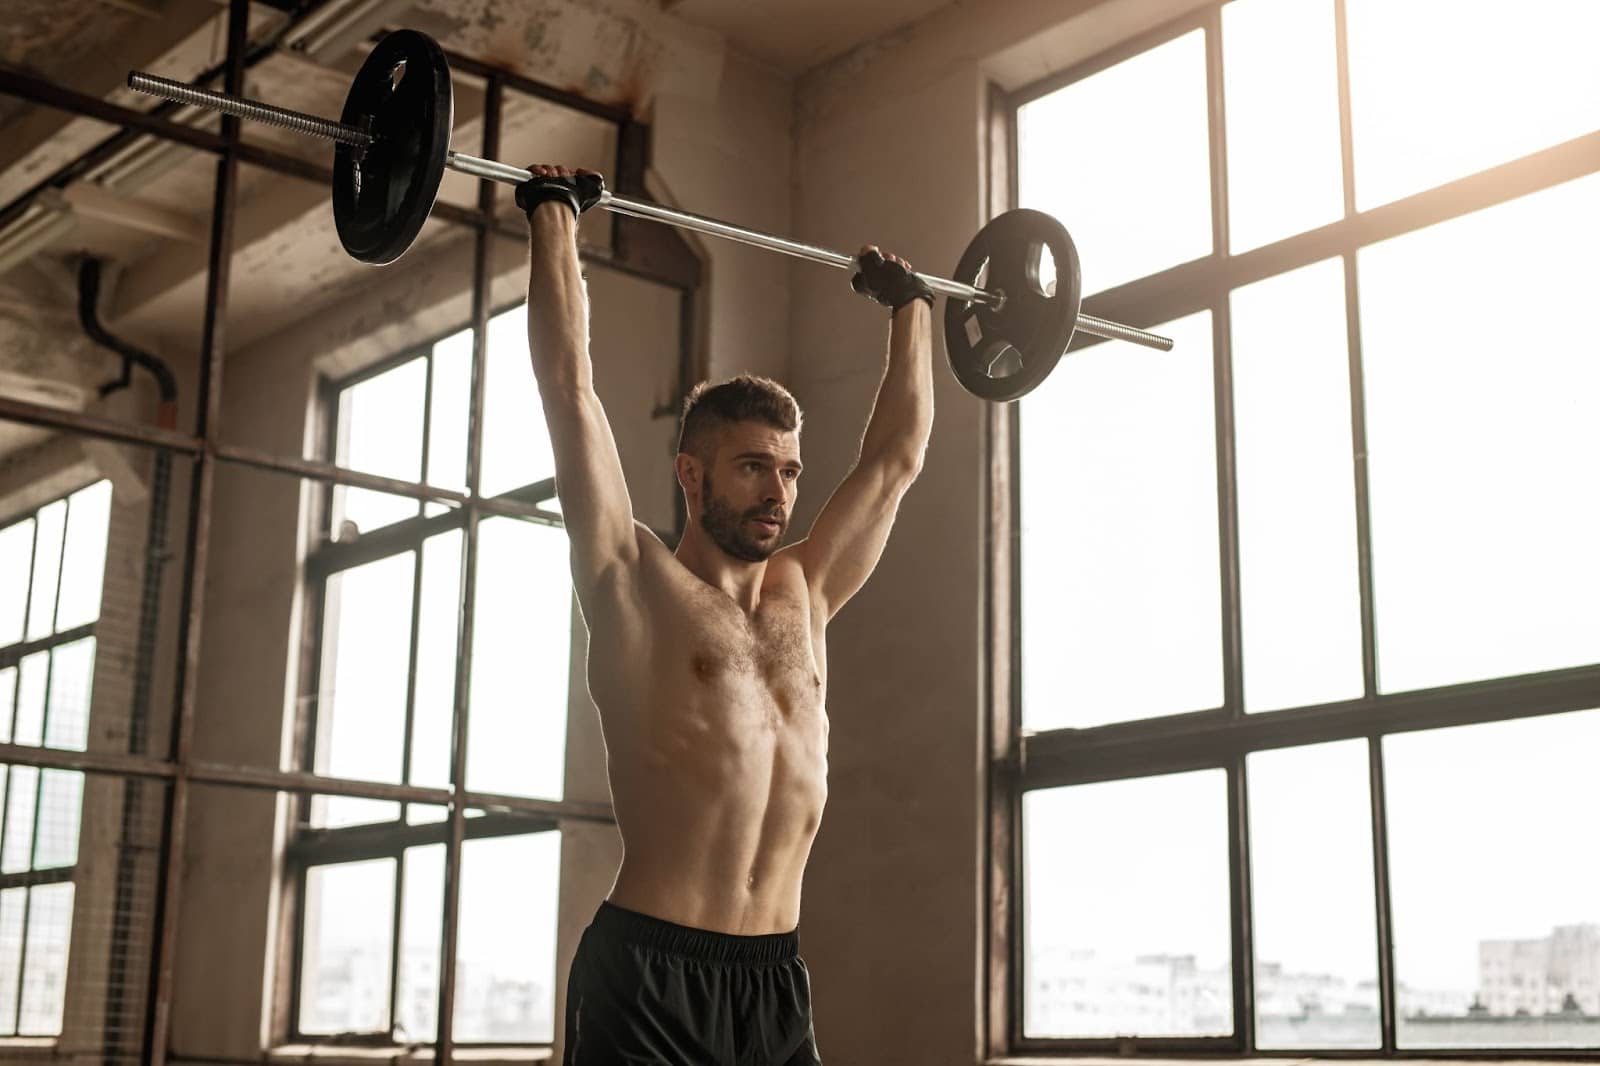 Muscular young man doing an overhead press in front of several large windows.